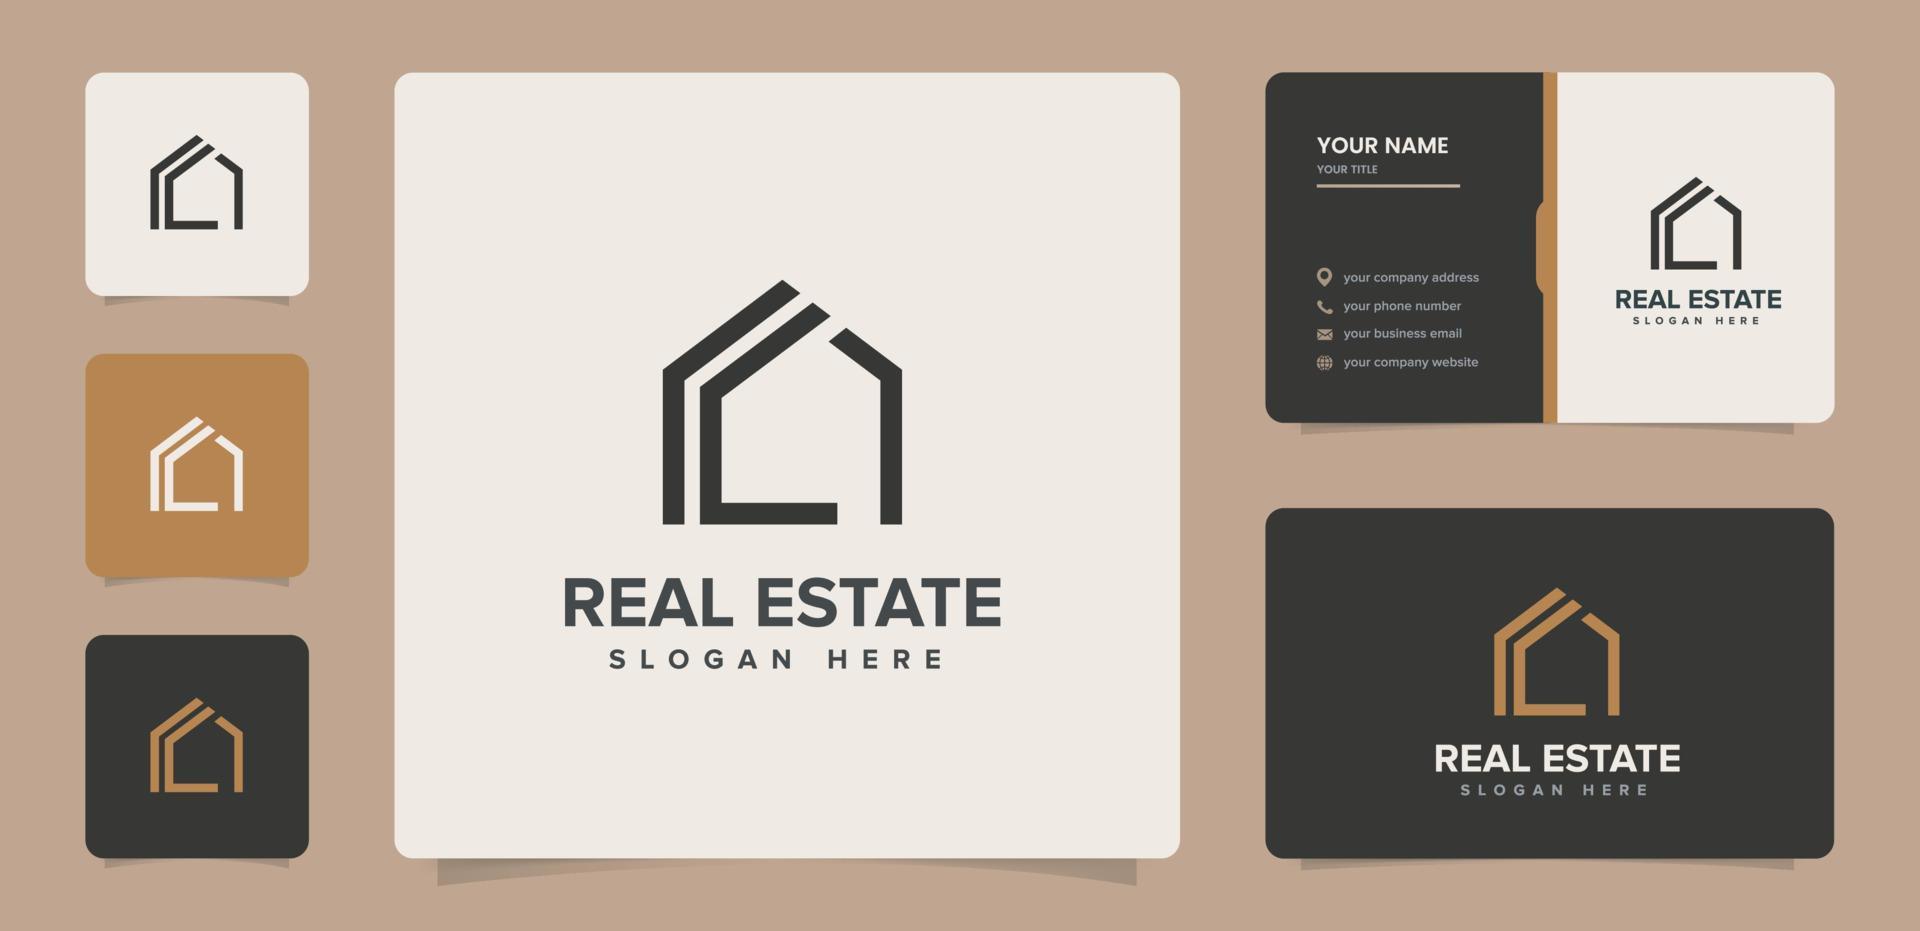 Real estate logo good for business property development, construction, real estate, home rental logo. with business card templete design vector